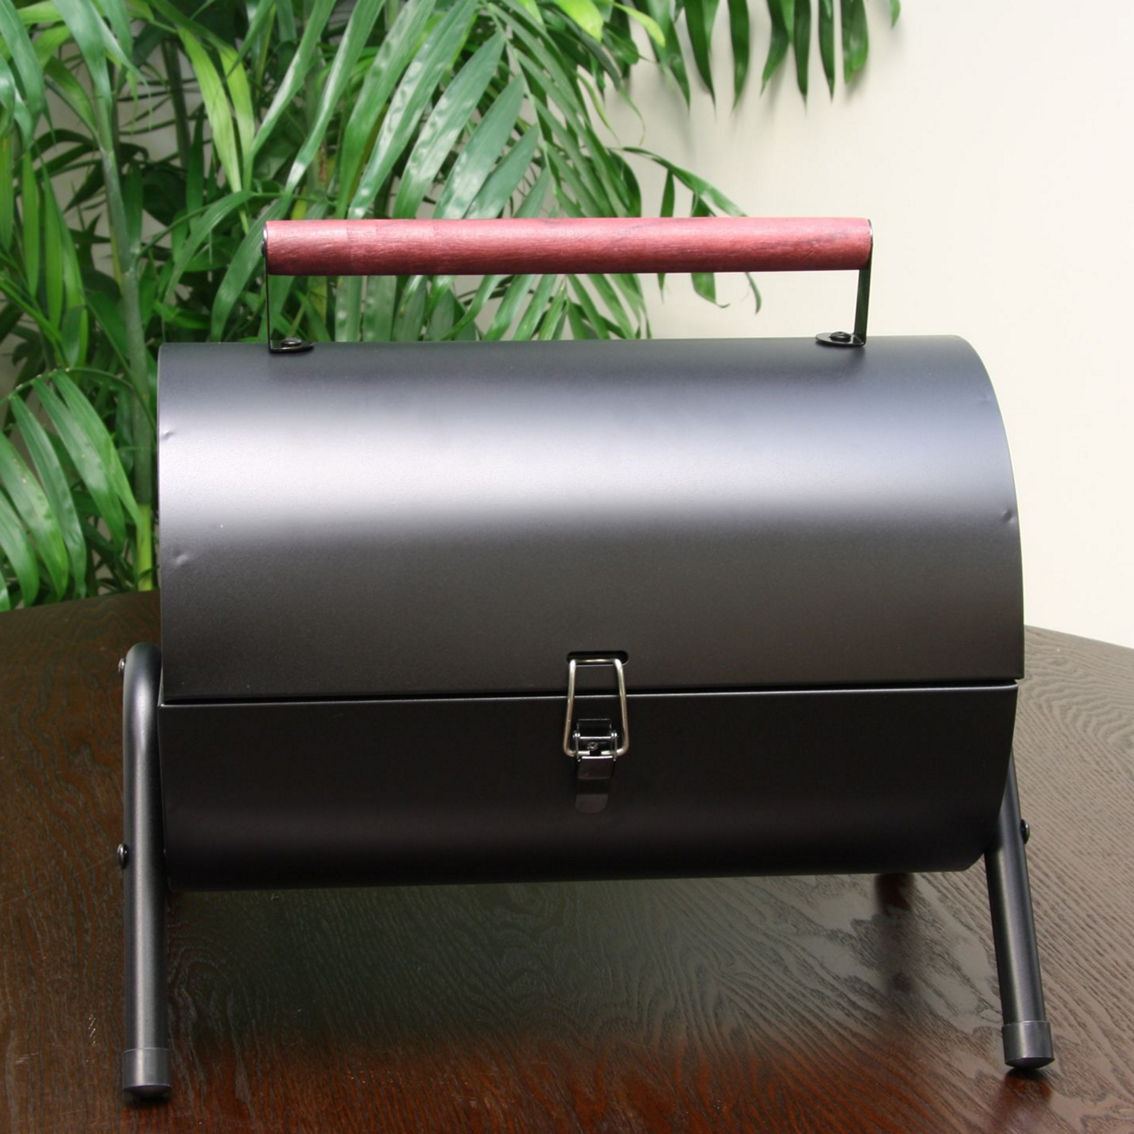 Gibson Home Delwin Carbon Steel Barrel BBQ in Black with Burgundy Wood Handle - Image 2 of 4